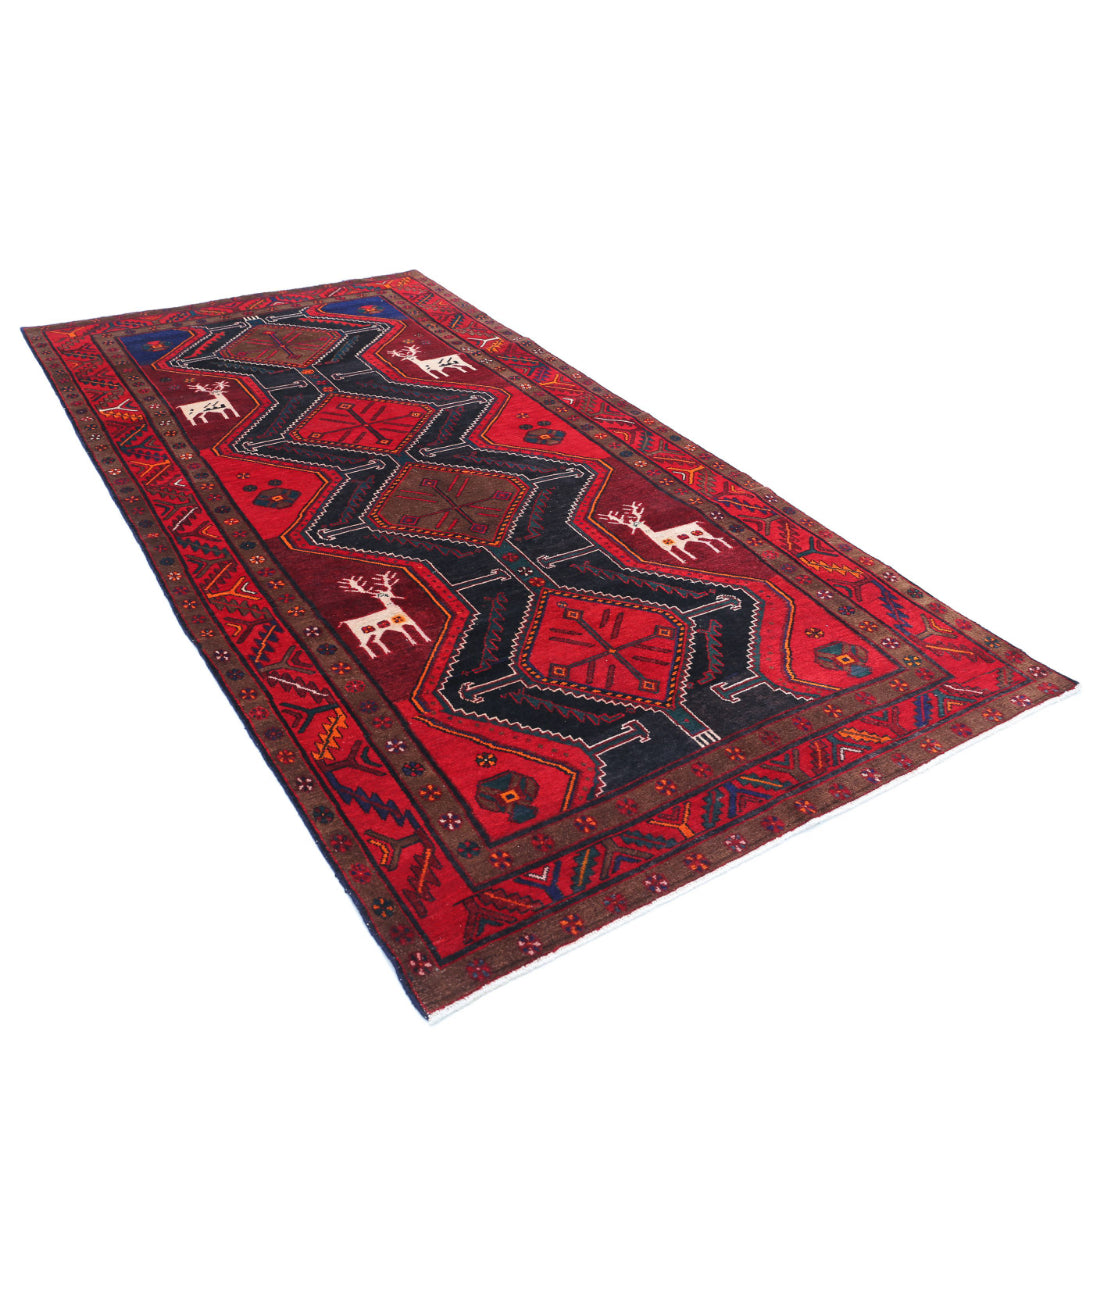 Hand Knotted Persian Hamadan Wool Rug - 5'3'' x 10'4'' 5'3'' x 10'4'' (158 X 310) / Black / Red